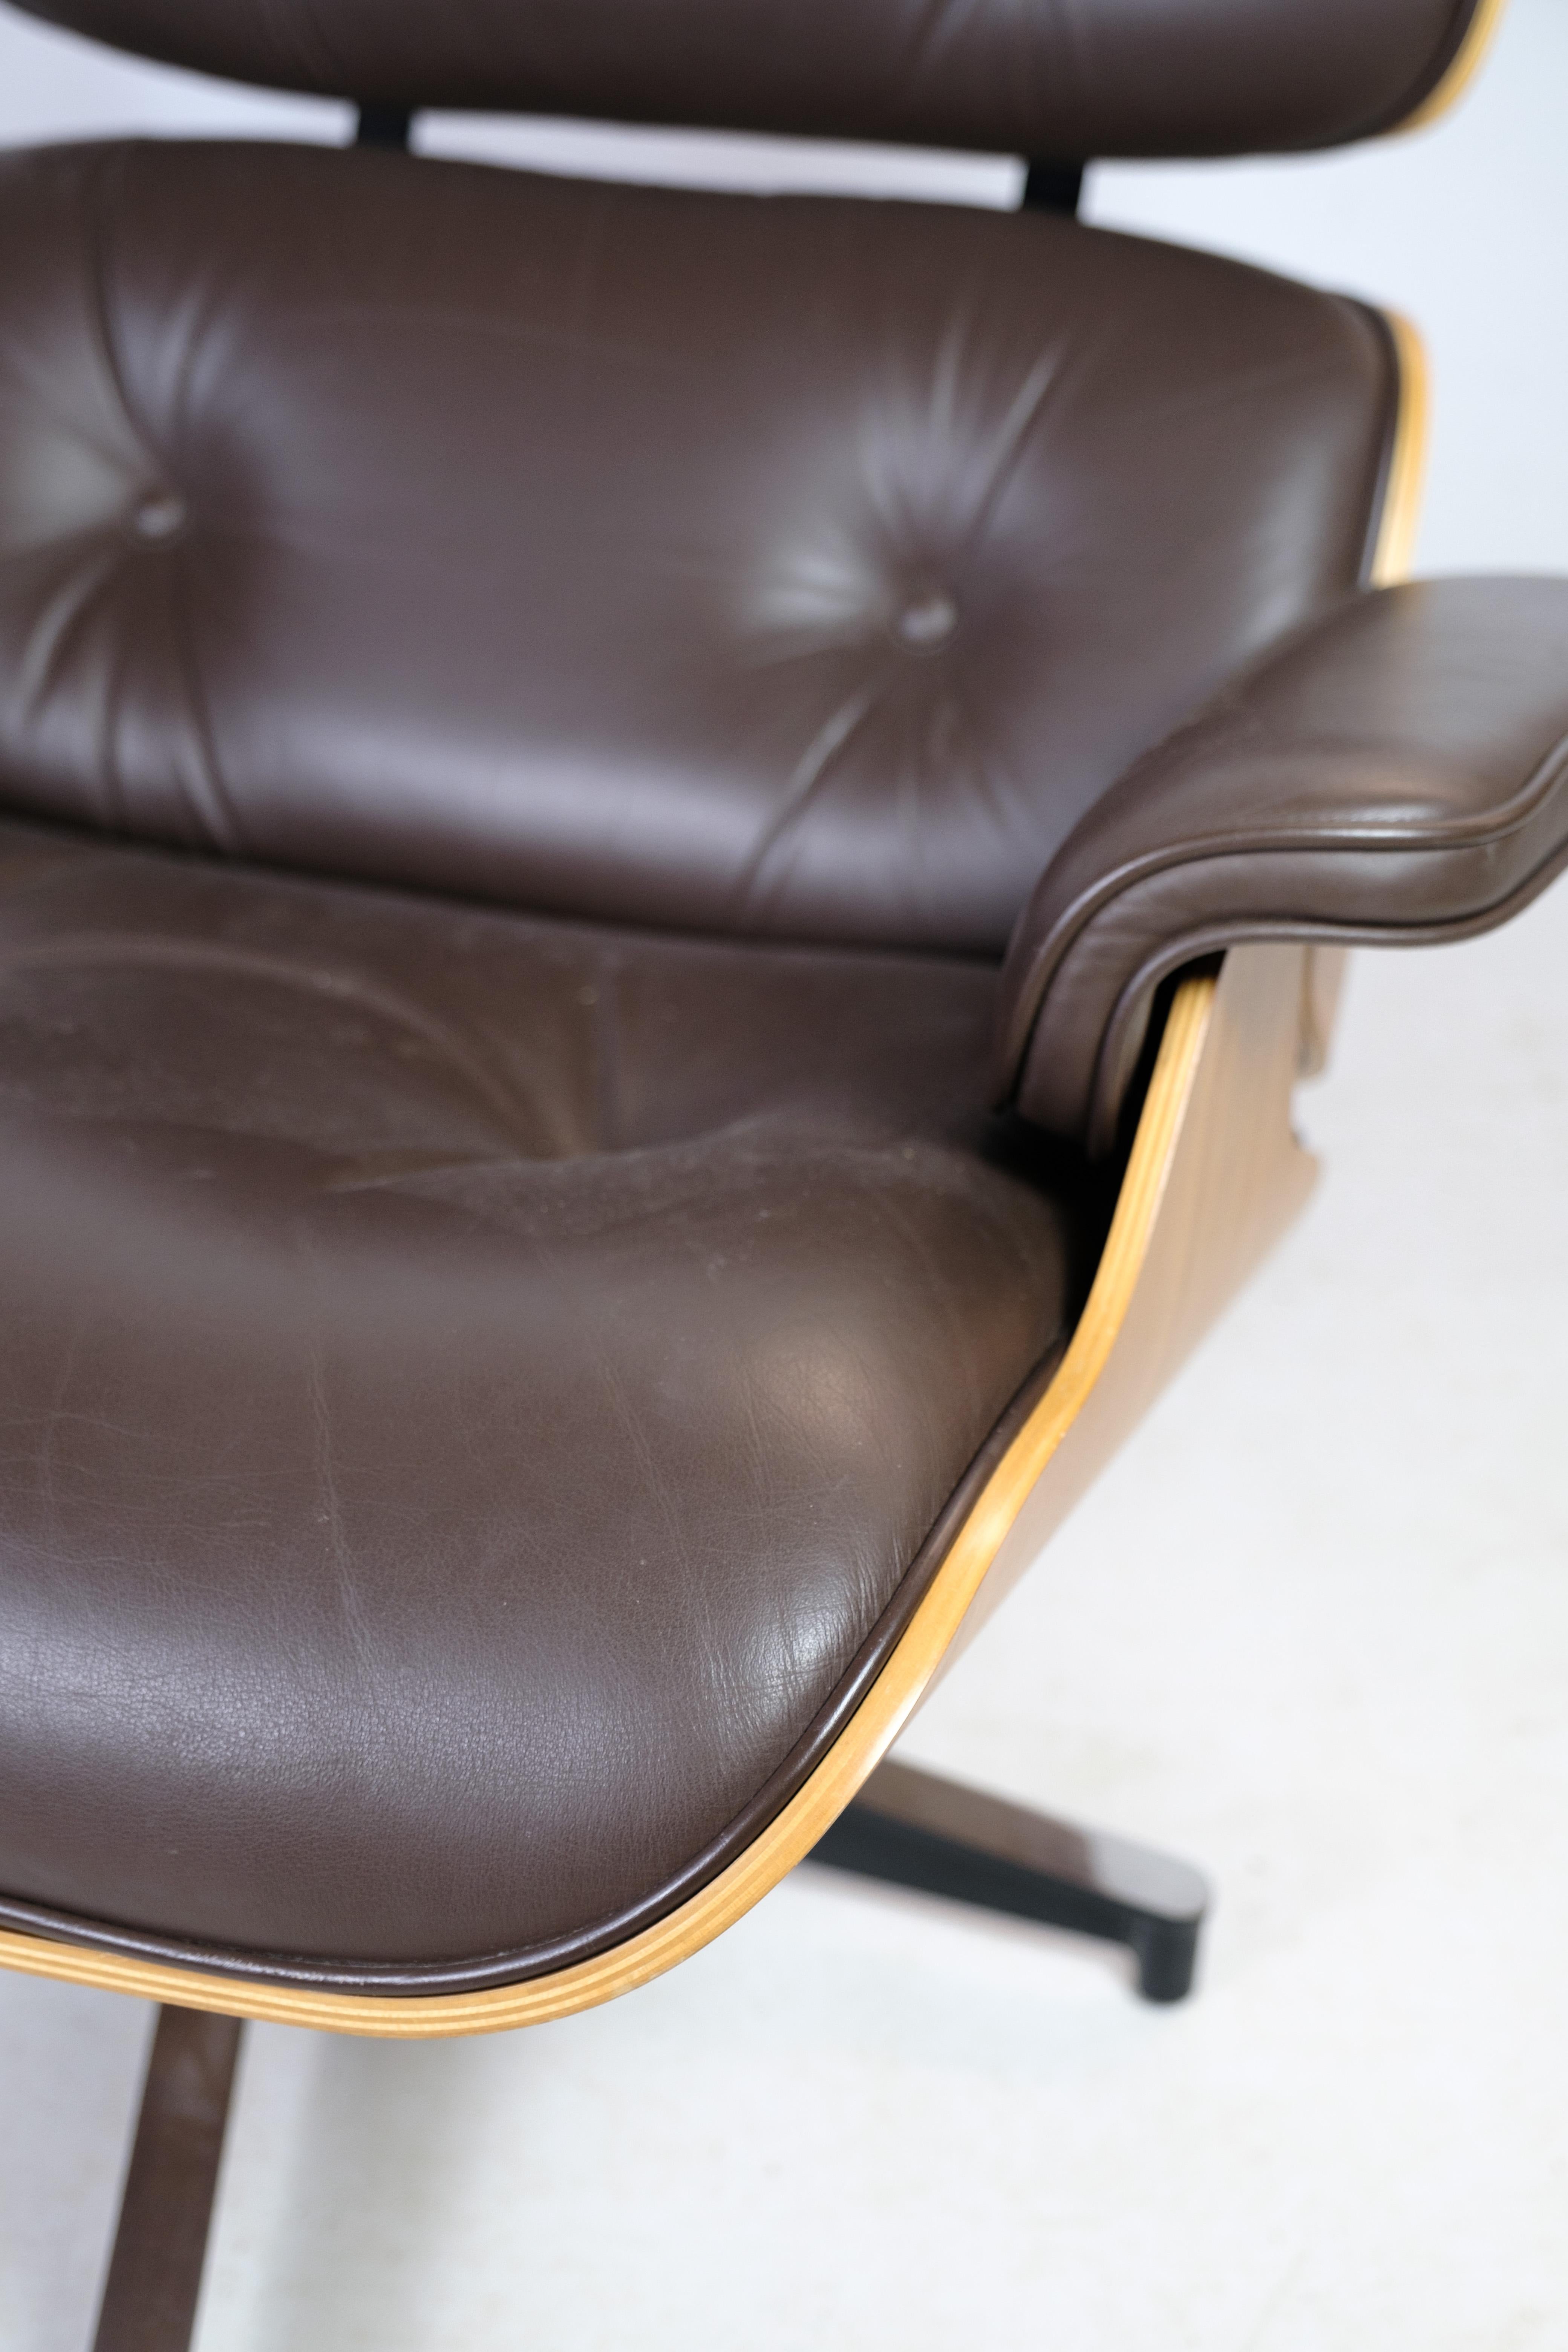 The Charles Eames Lounge Chair in brown leather and light walnut, produced by Herman Miller. Designed in 1958 and brought to life in 2007, this iconic piece of furniture represents timeless elegance and exceptional craftsmanship.

The Charles Eames